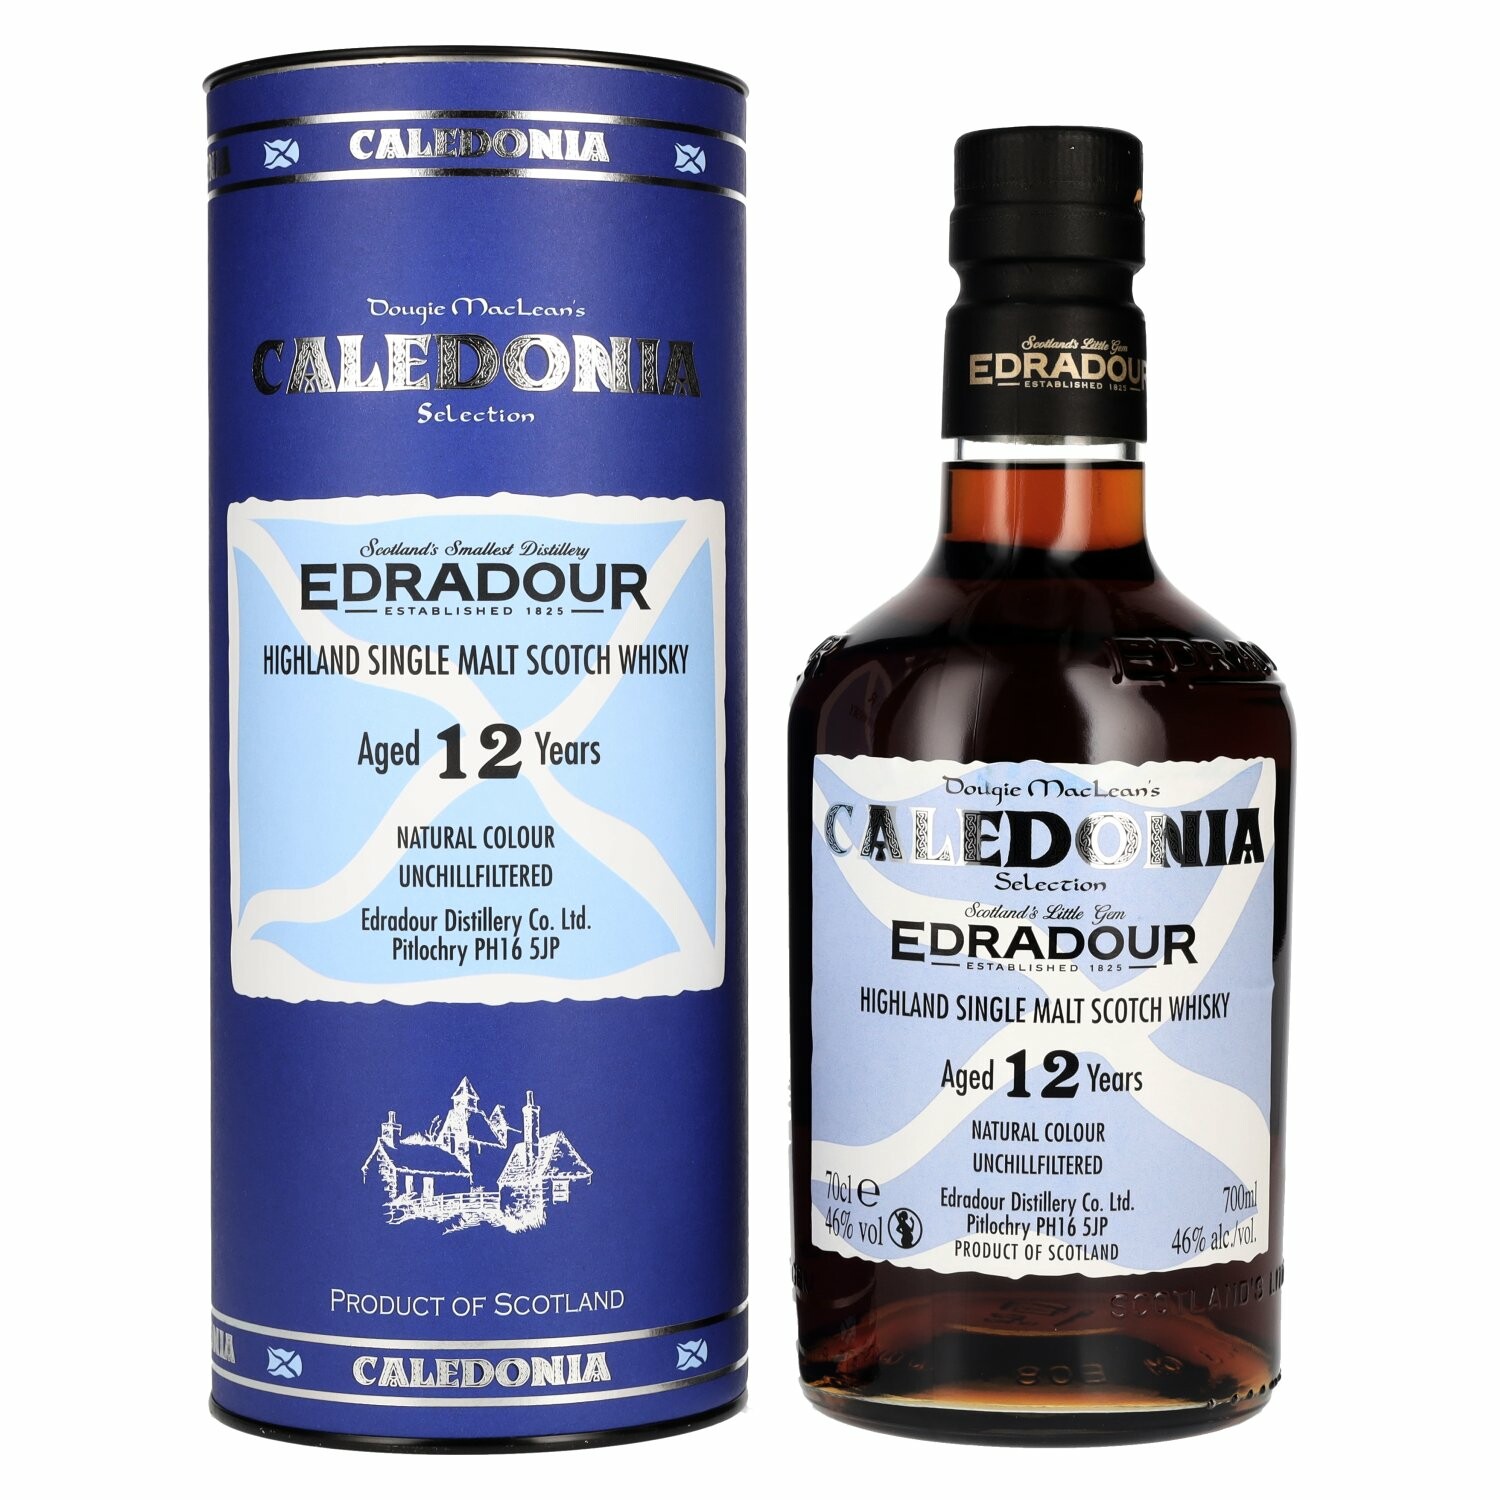 Edradour CALEDONIA 12 Years Old Highland Single Malt Scotch Whisky 46% Vol. 0,7l in Giftbox